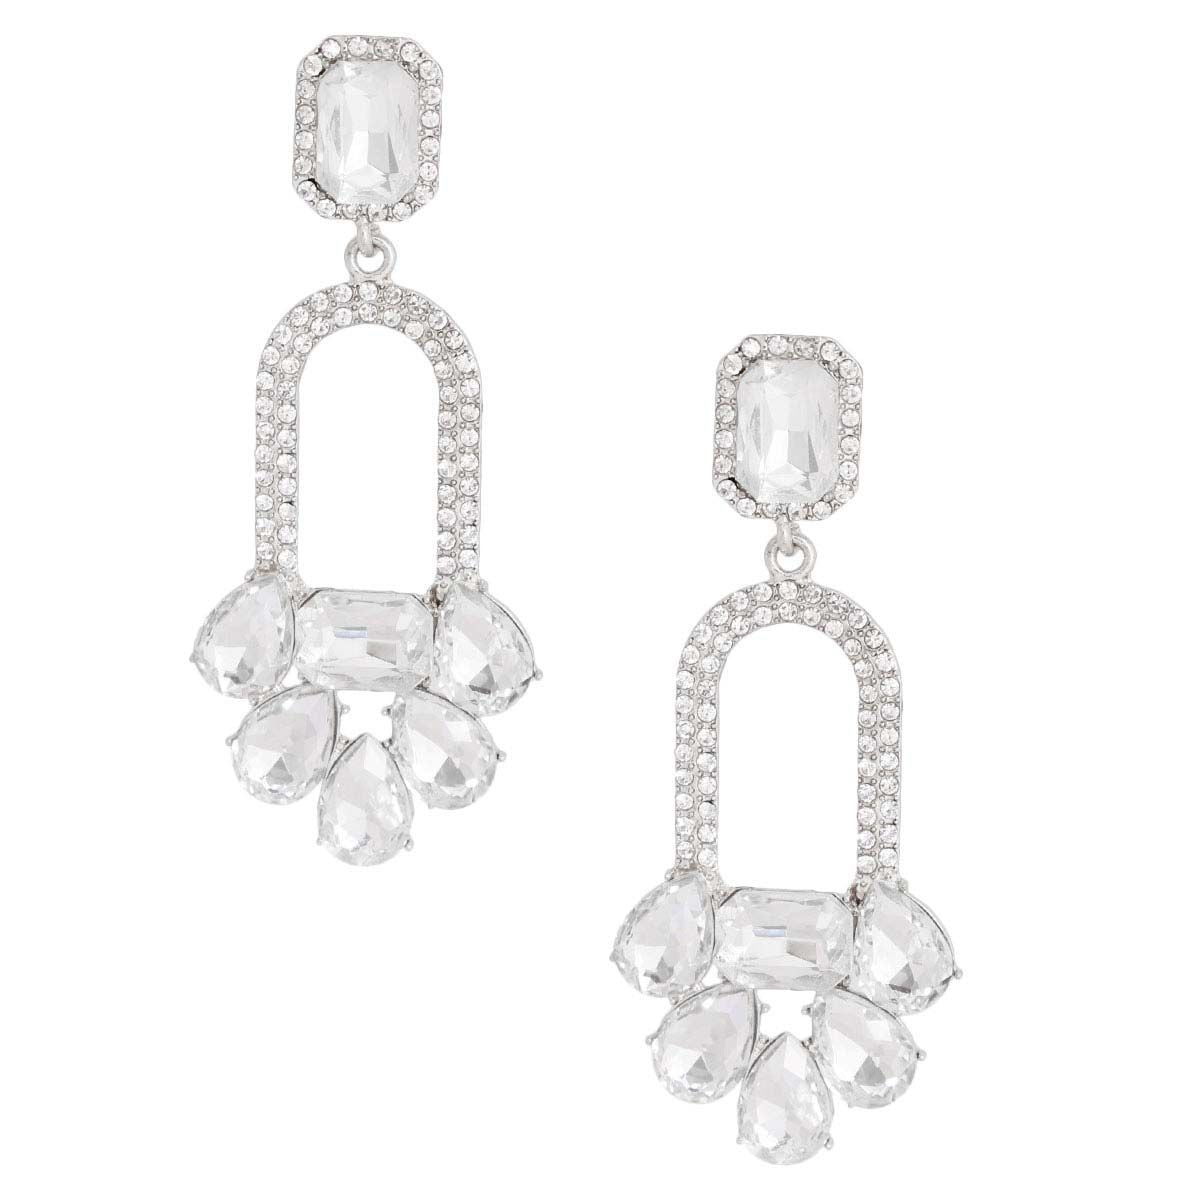 Silver Arched Crystal Earrings